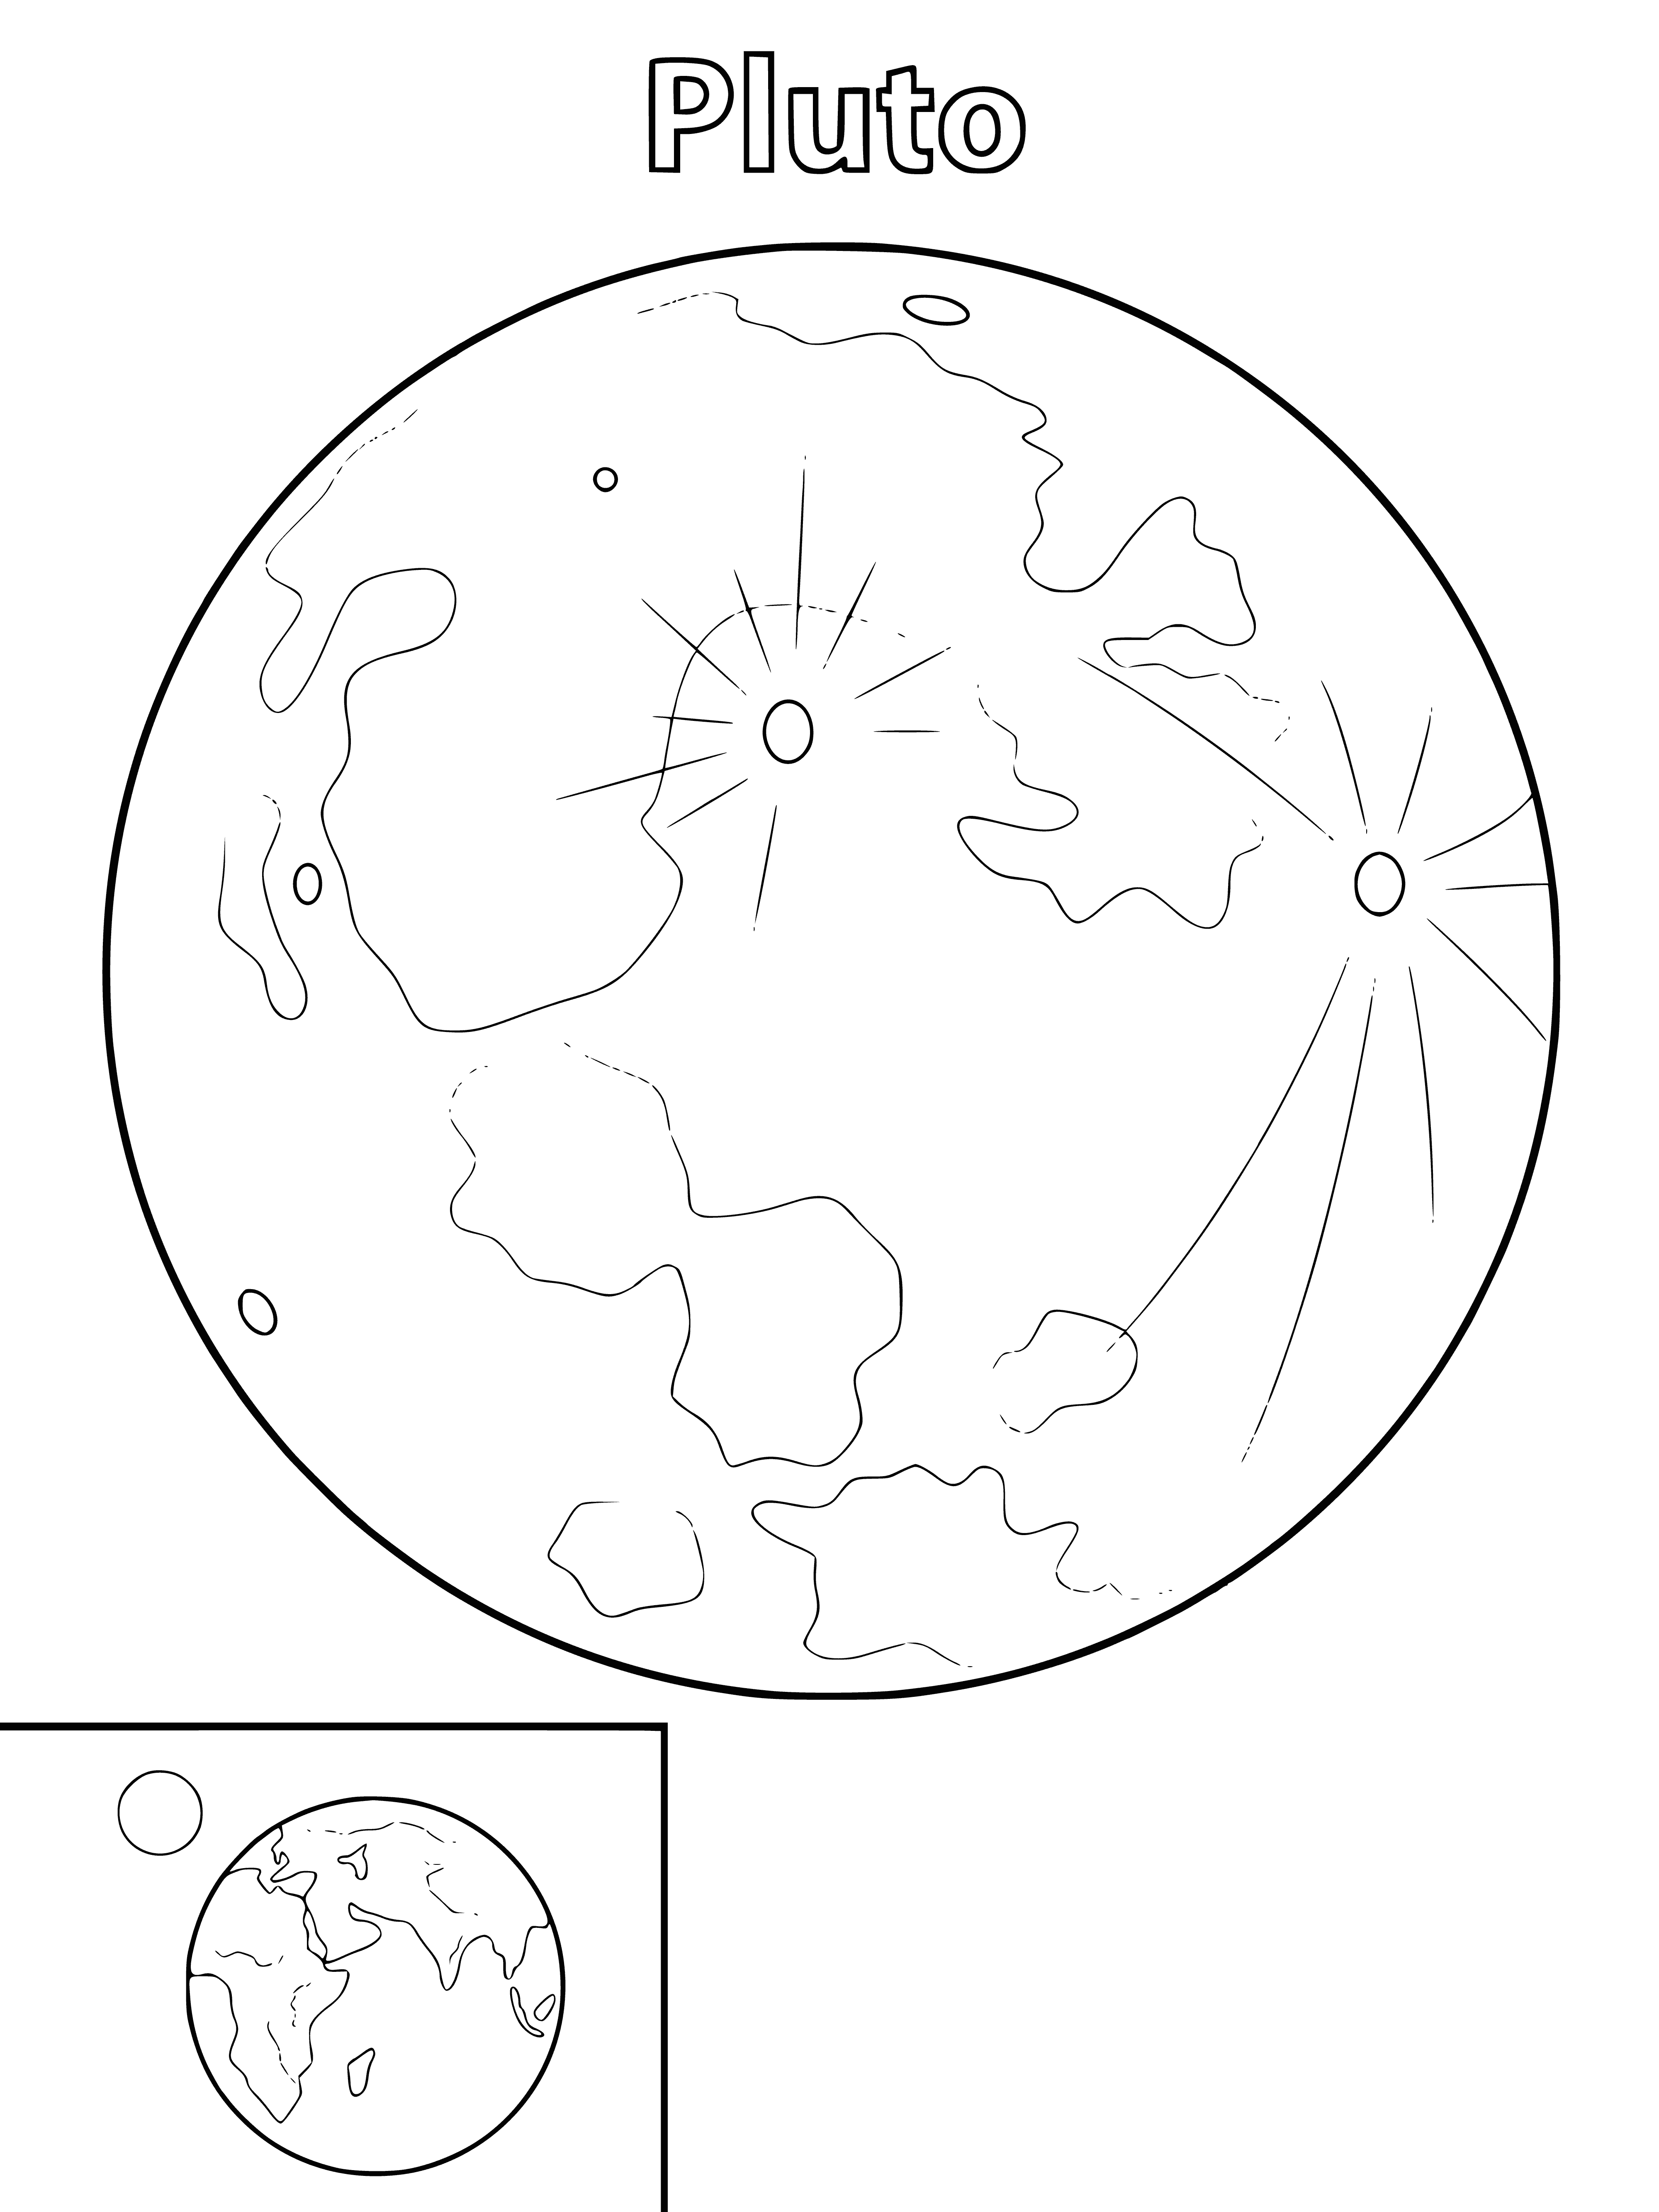 coloring page: Little-known Pluto is the outermost planet, small & cold; illuminated by the sun just beyond the edge of the page.